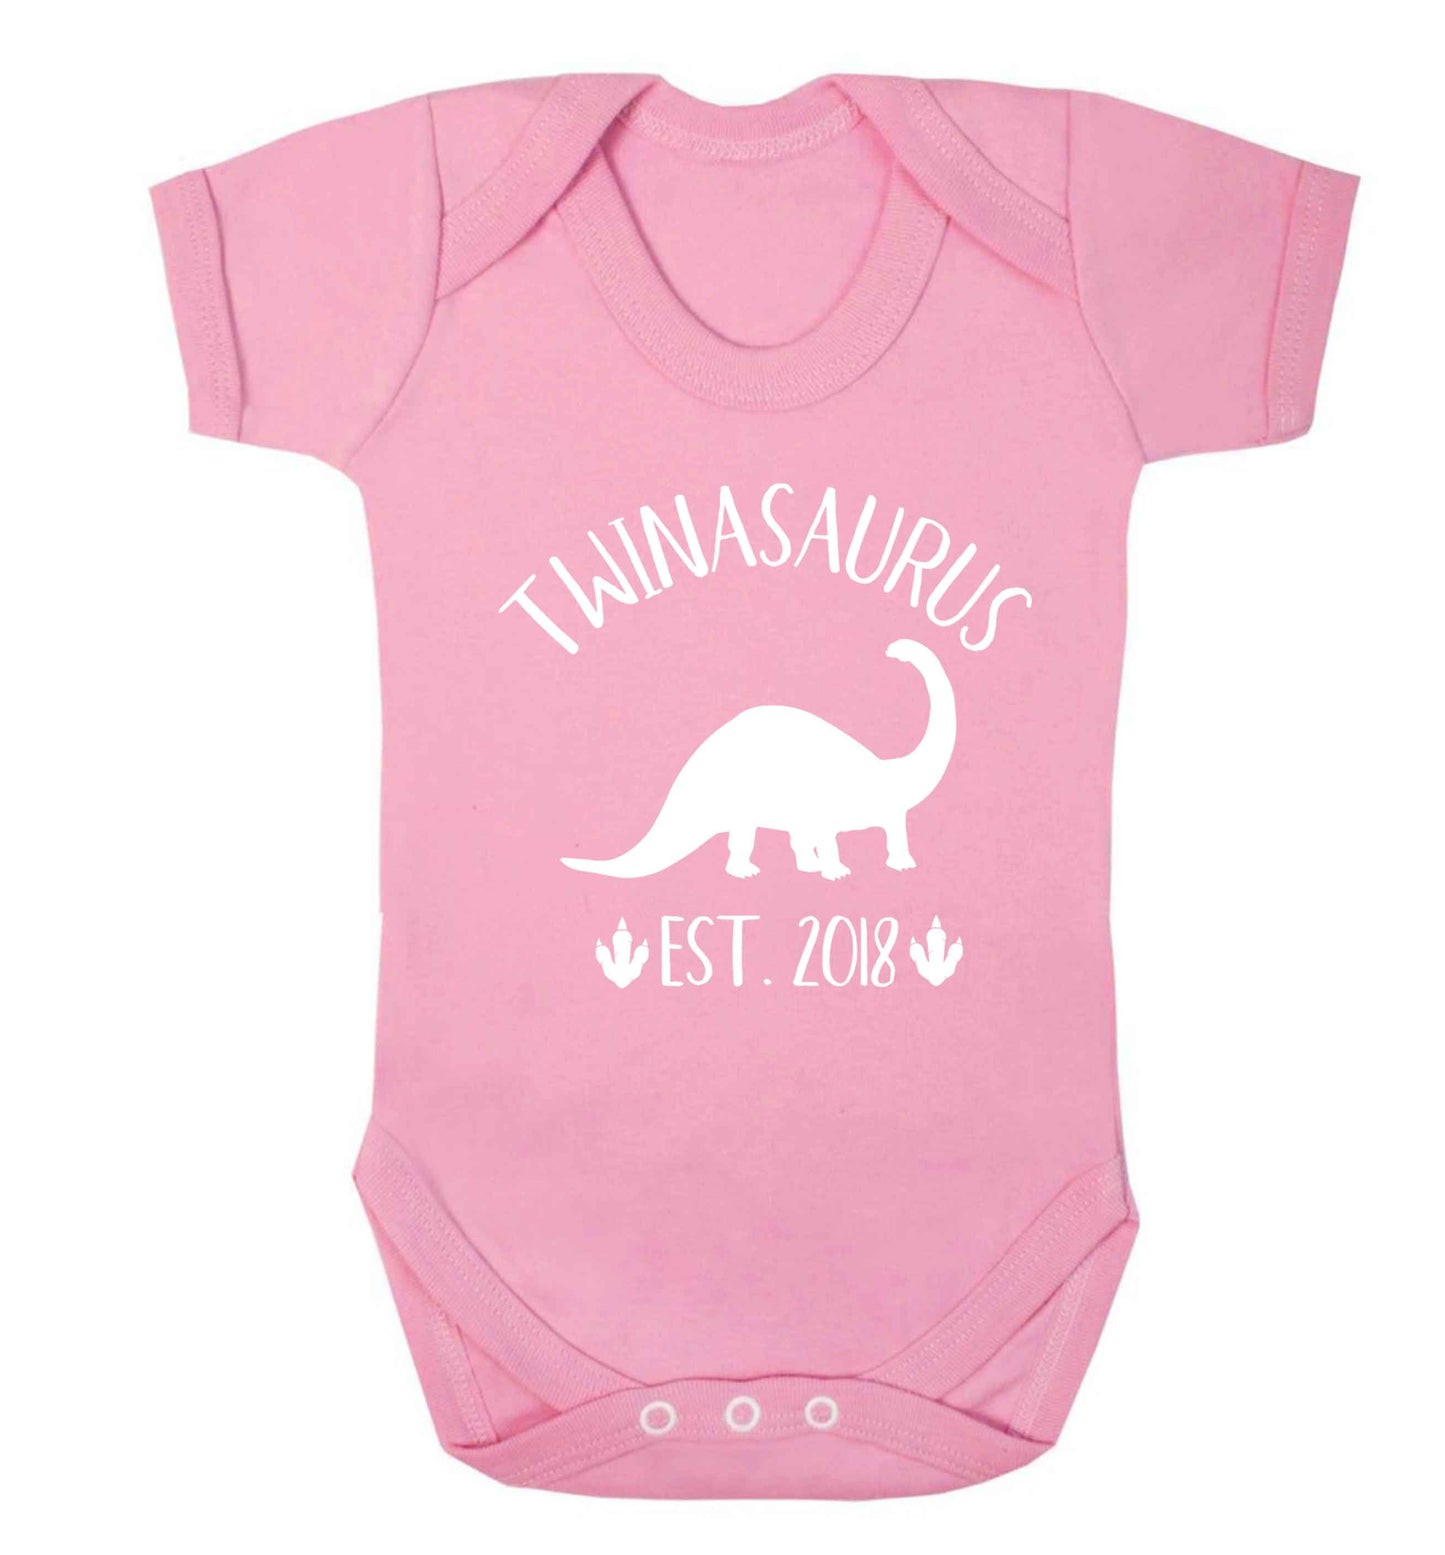 Personalised twinasaurus since (custom date) Baby Vest pale pink 18-24 months